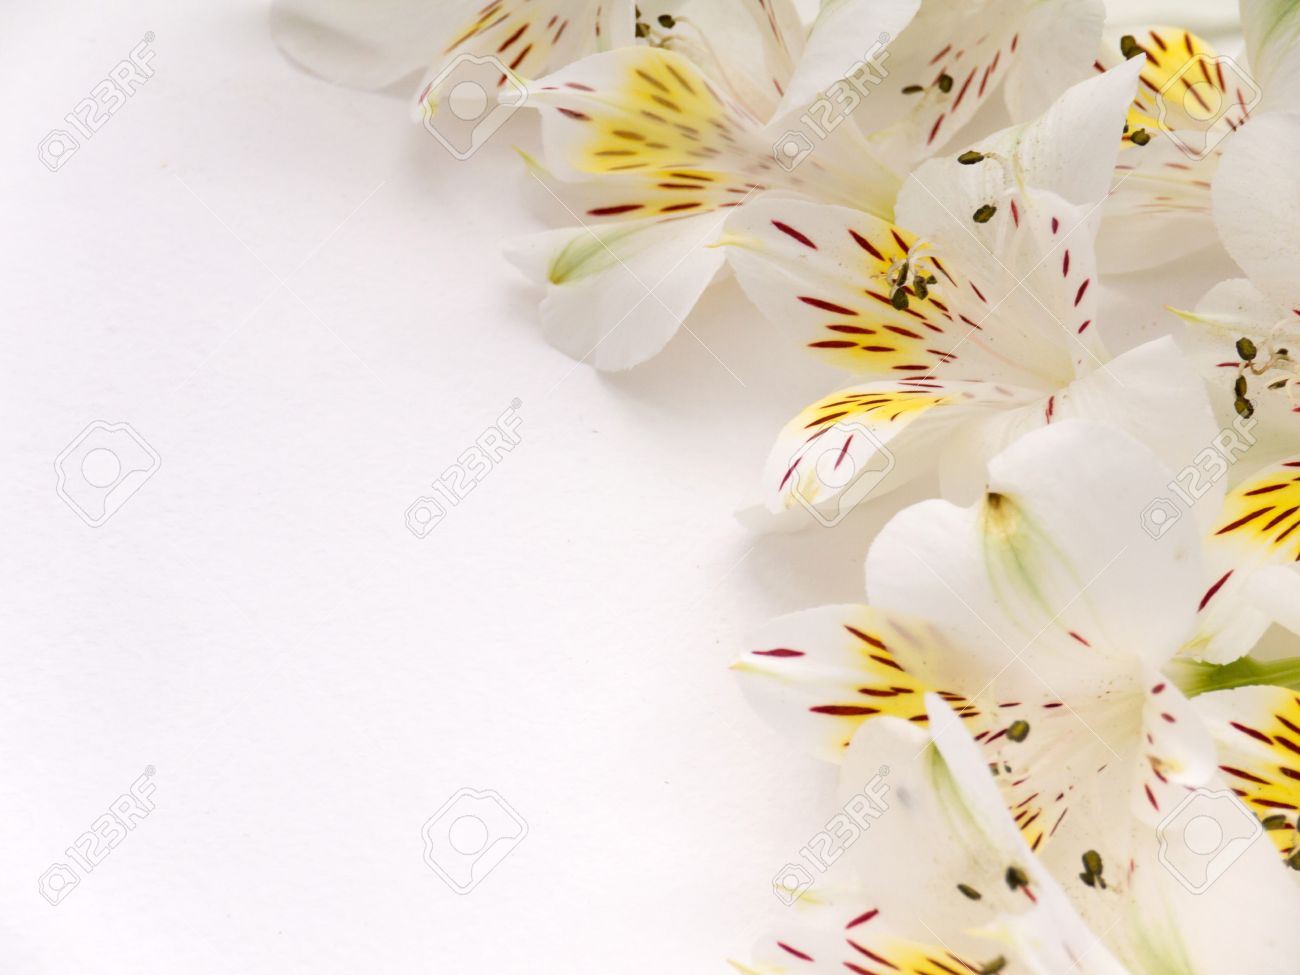 Alstroemeria Flowers On The Right Side Of White Background Stock